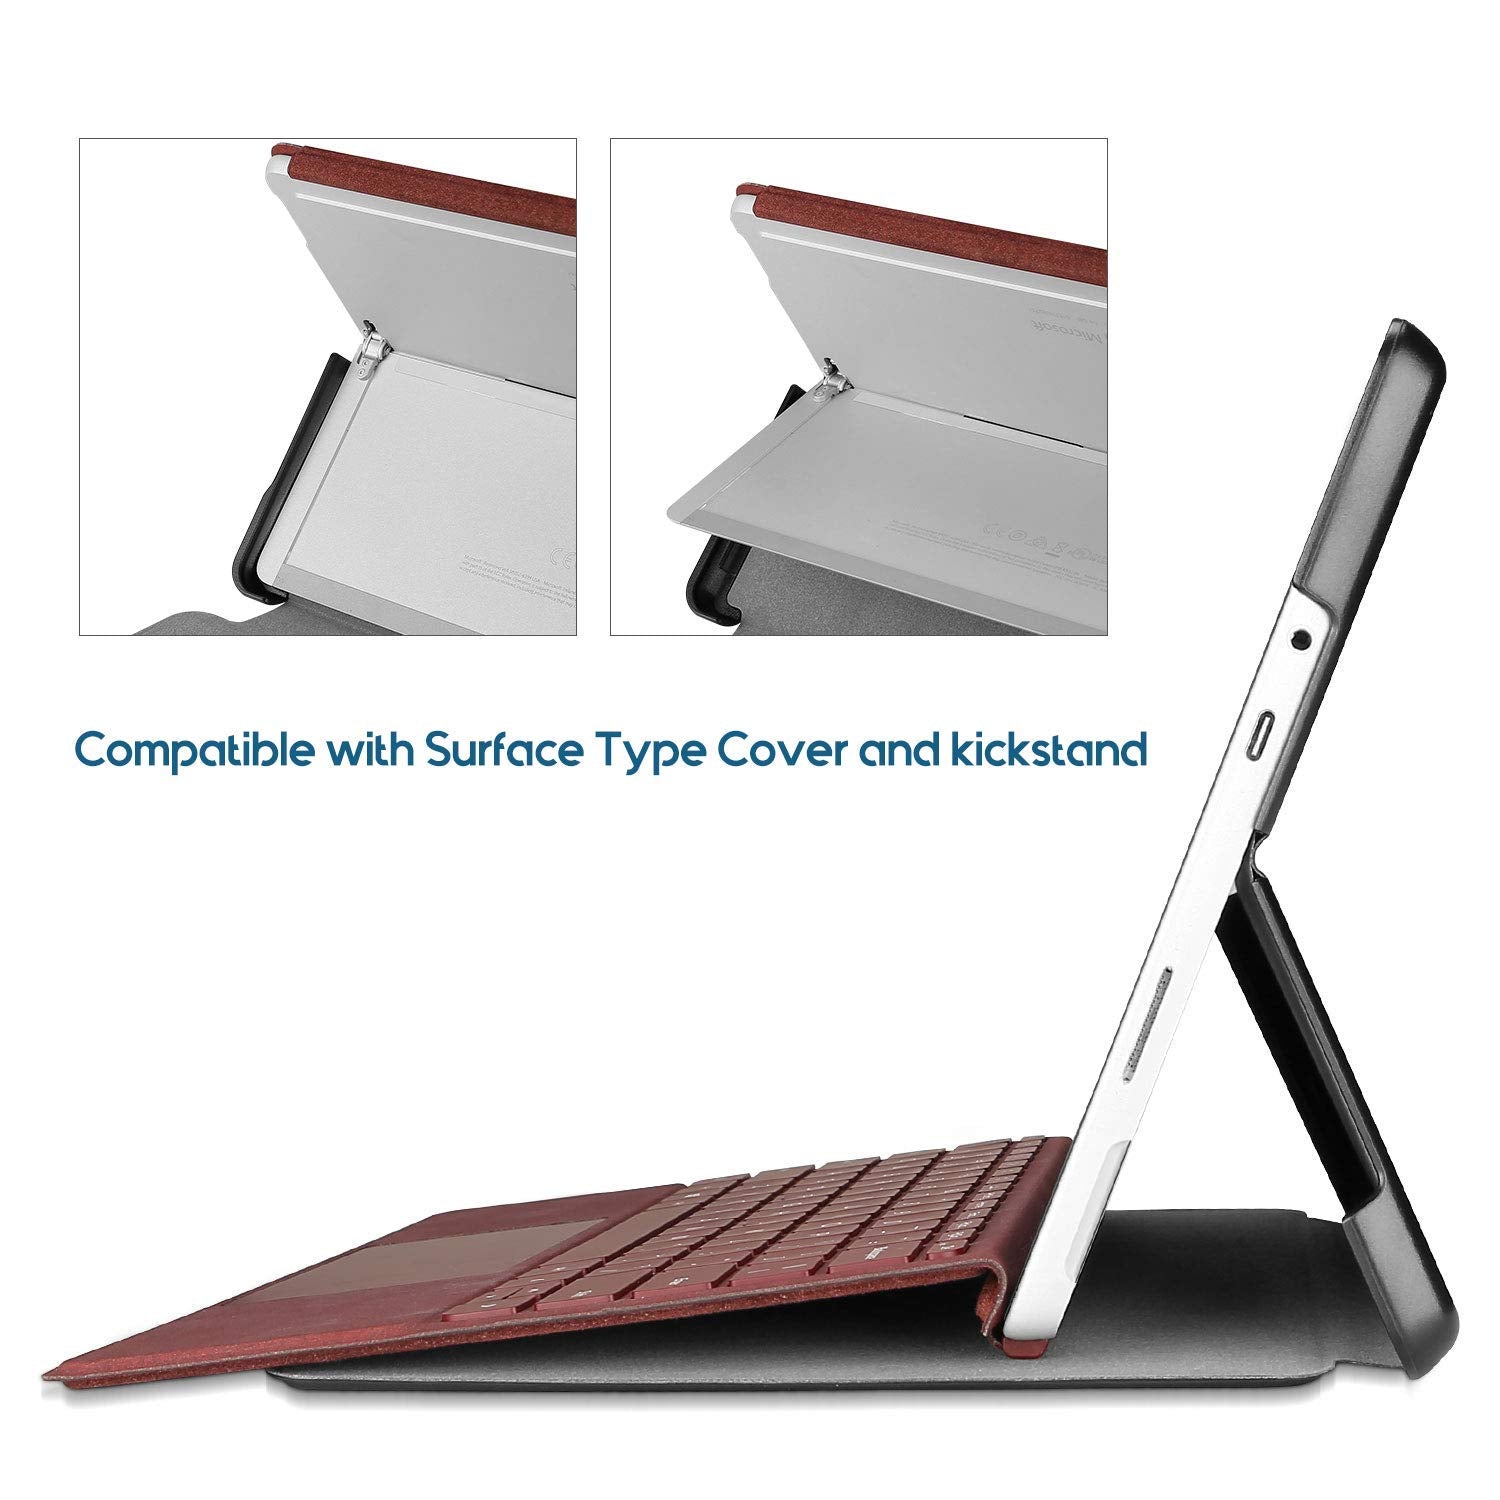 New Procase Protective Case Bundle With Keyboard Case For Surface Go 3 2021 / Surface Go 2 2020 / Surface Go 2018